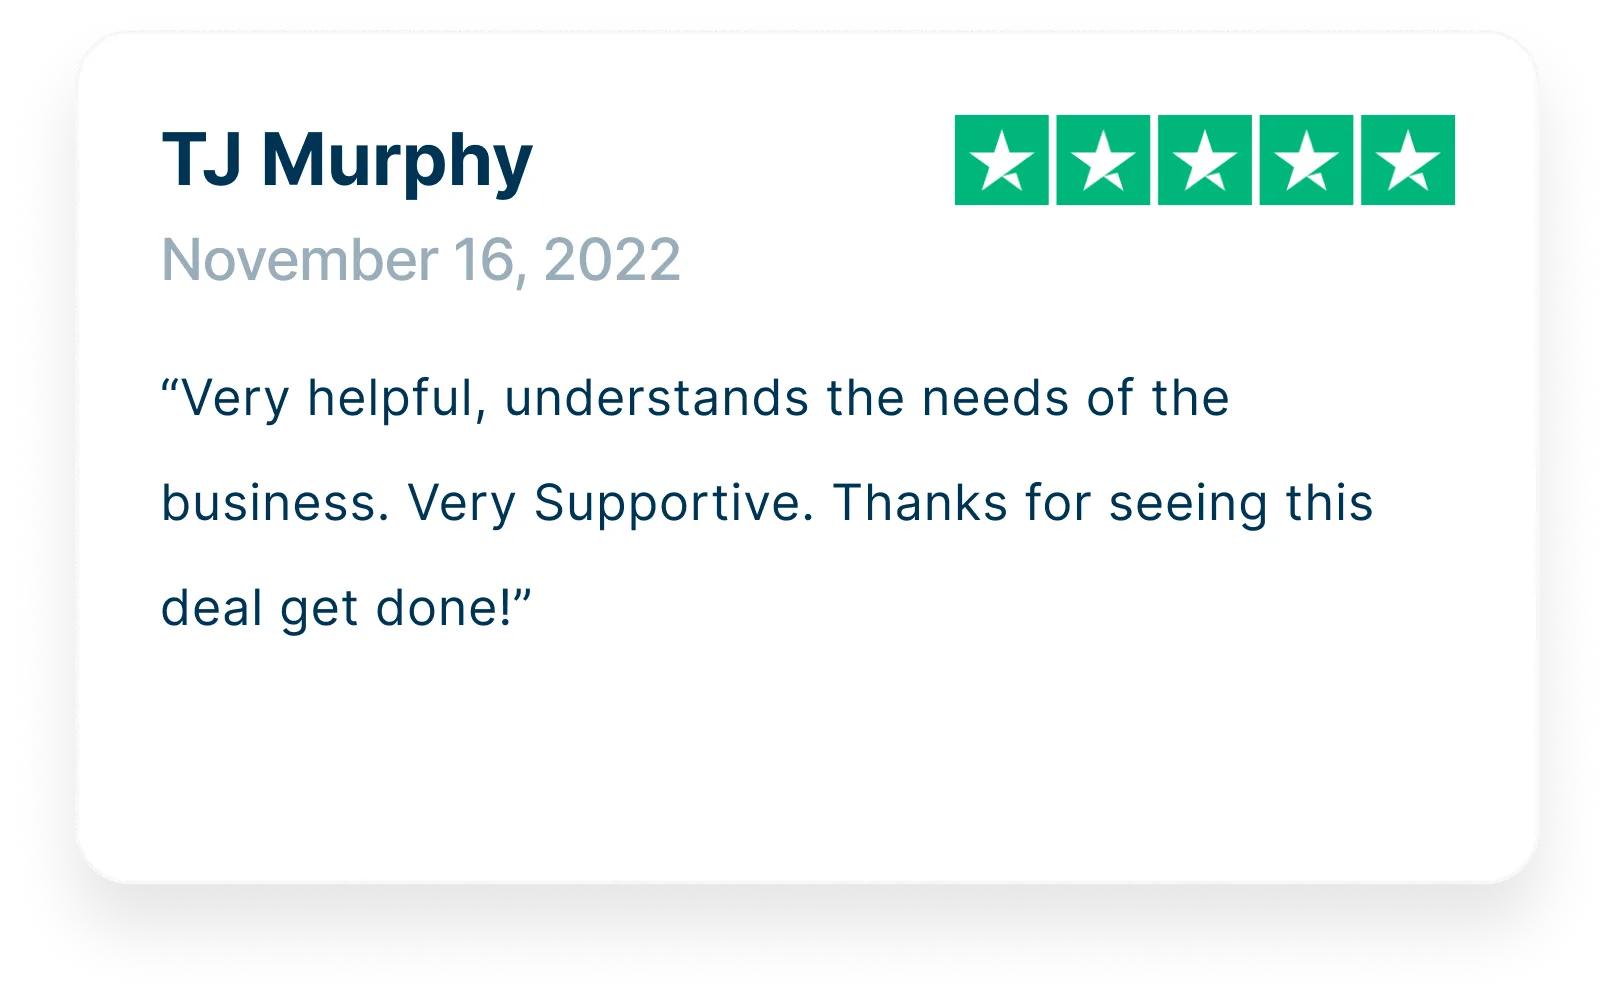 “Very helpful, understands the needs of the business. Very Supportive. Thanks for seeing this deal get done!”